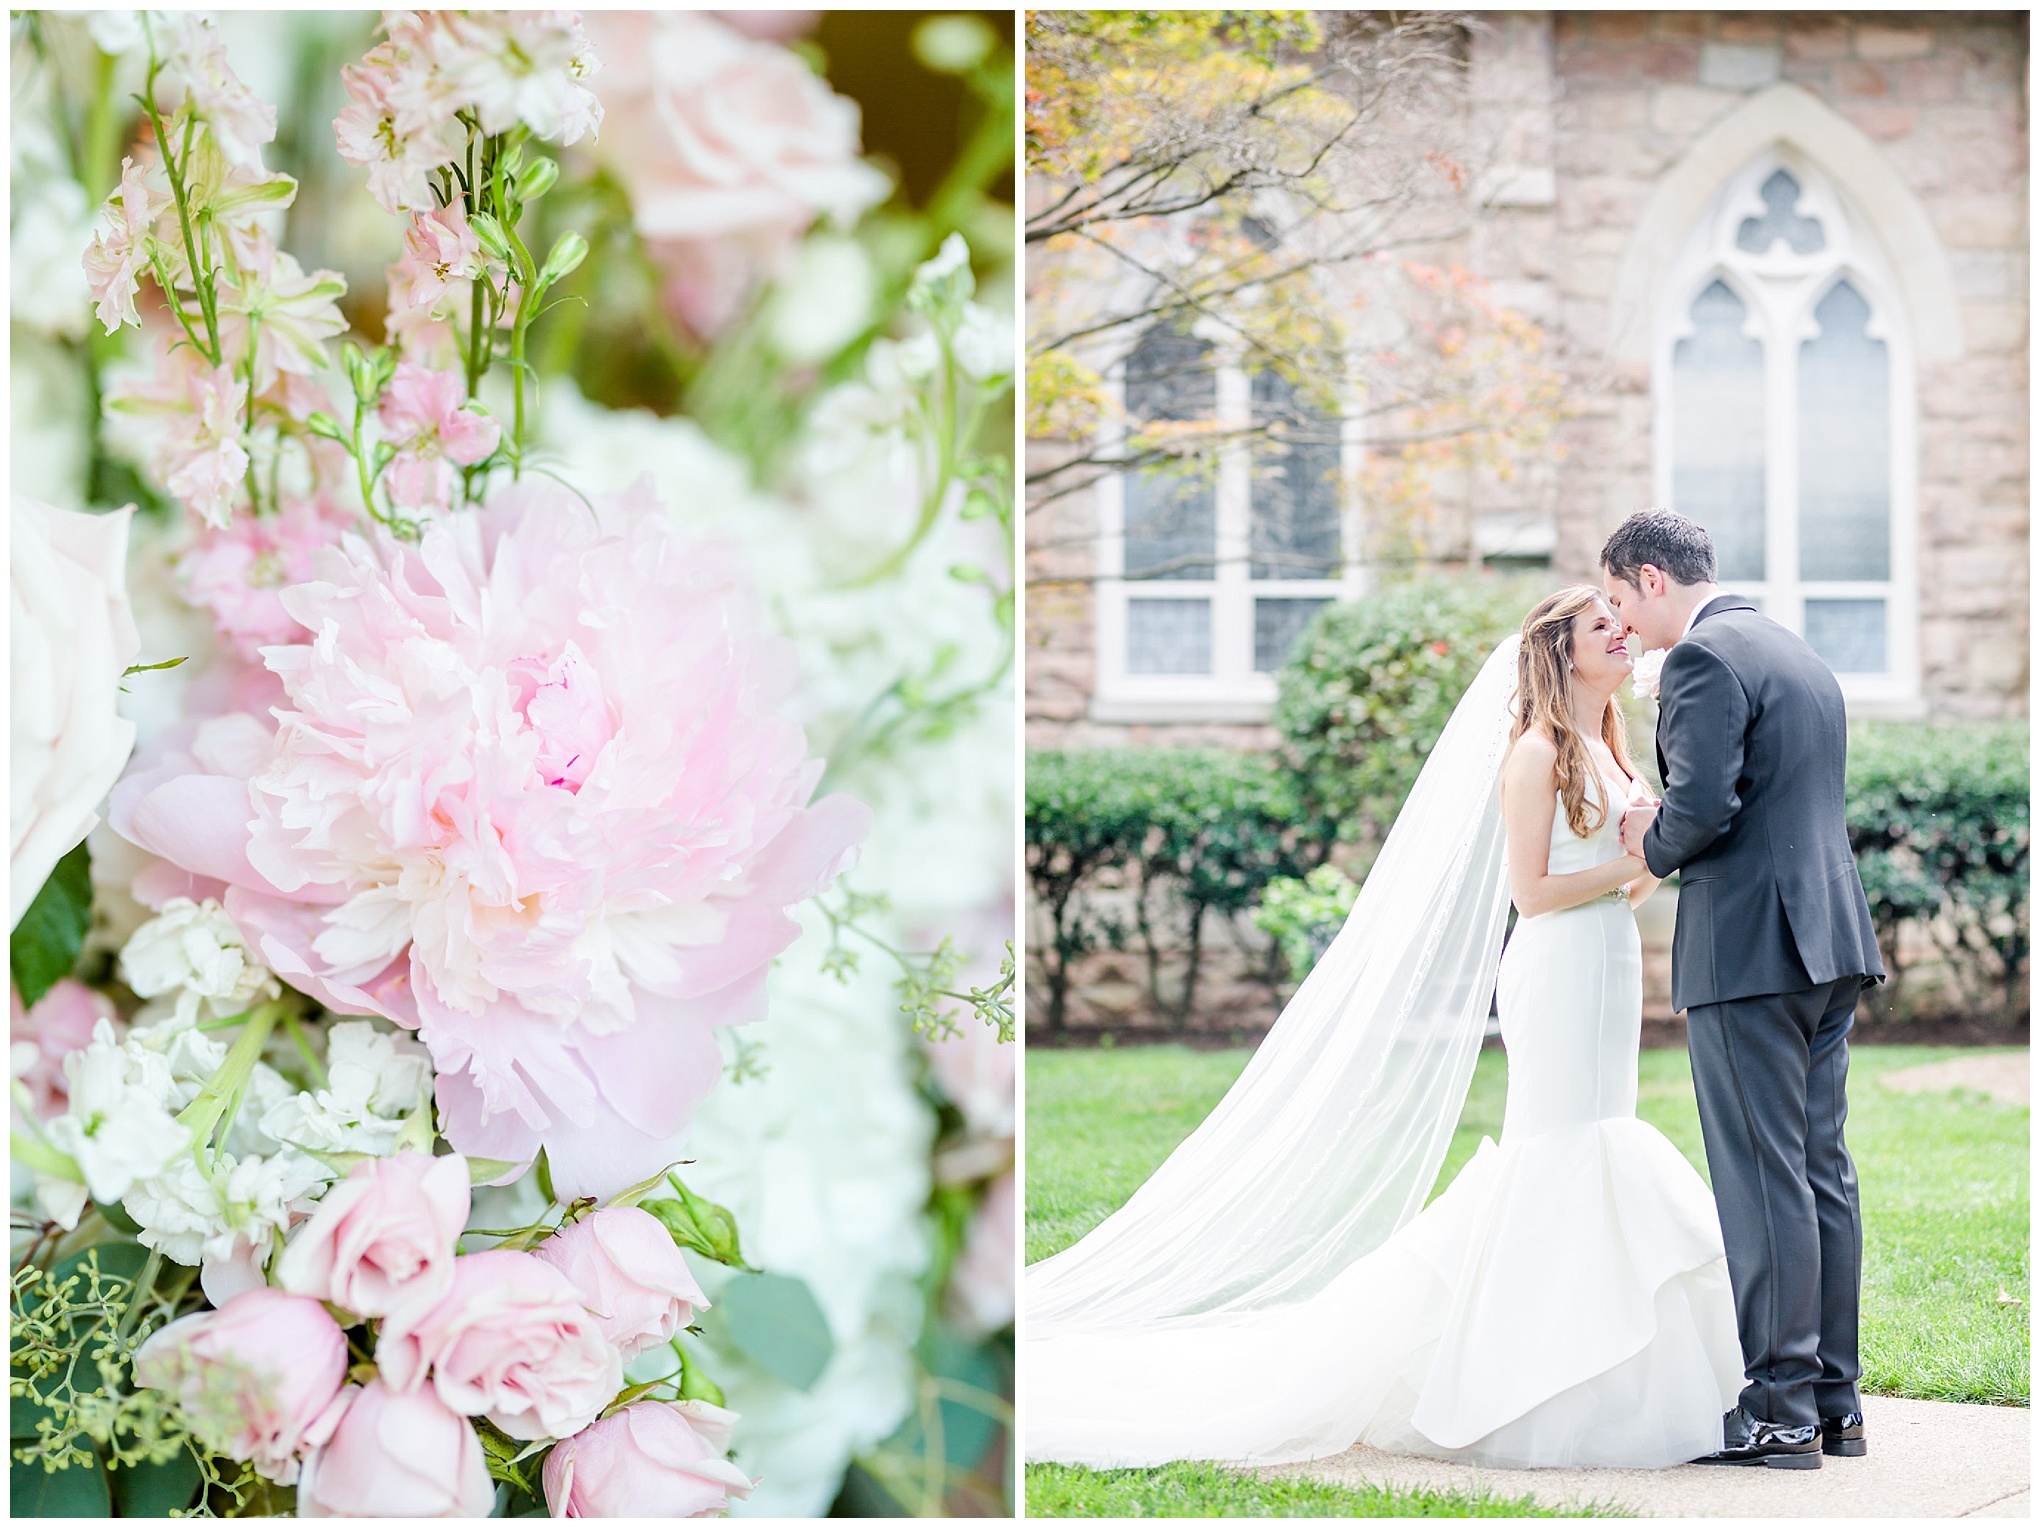 Washington D.C. wedding photography, D.C. wedding photographer, peonies, peony bridal bouquet, bride and groom kissing, pink and white aesthetic